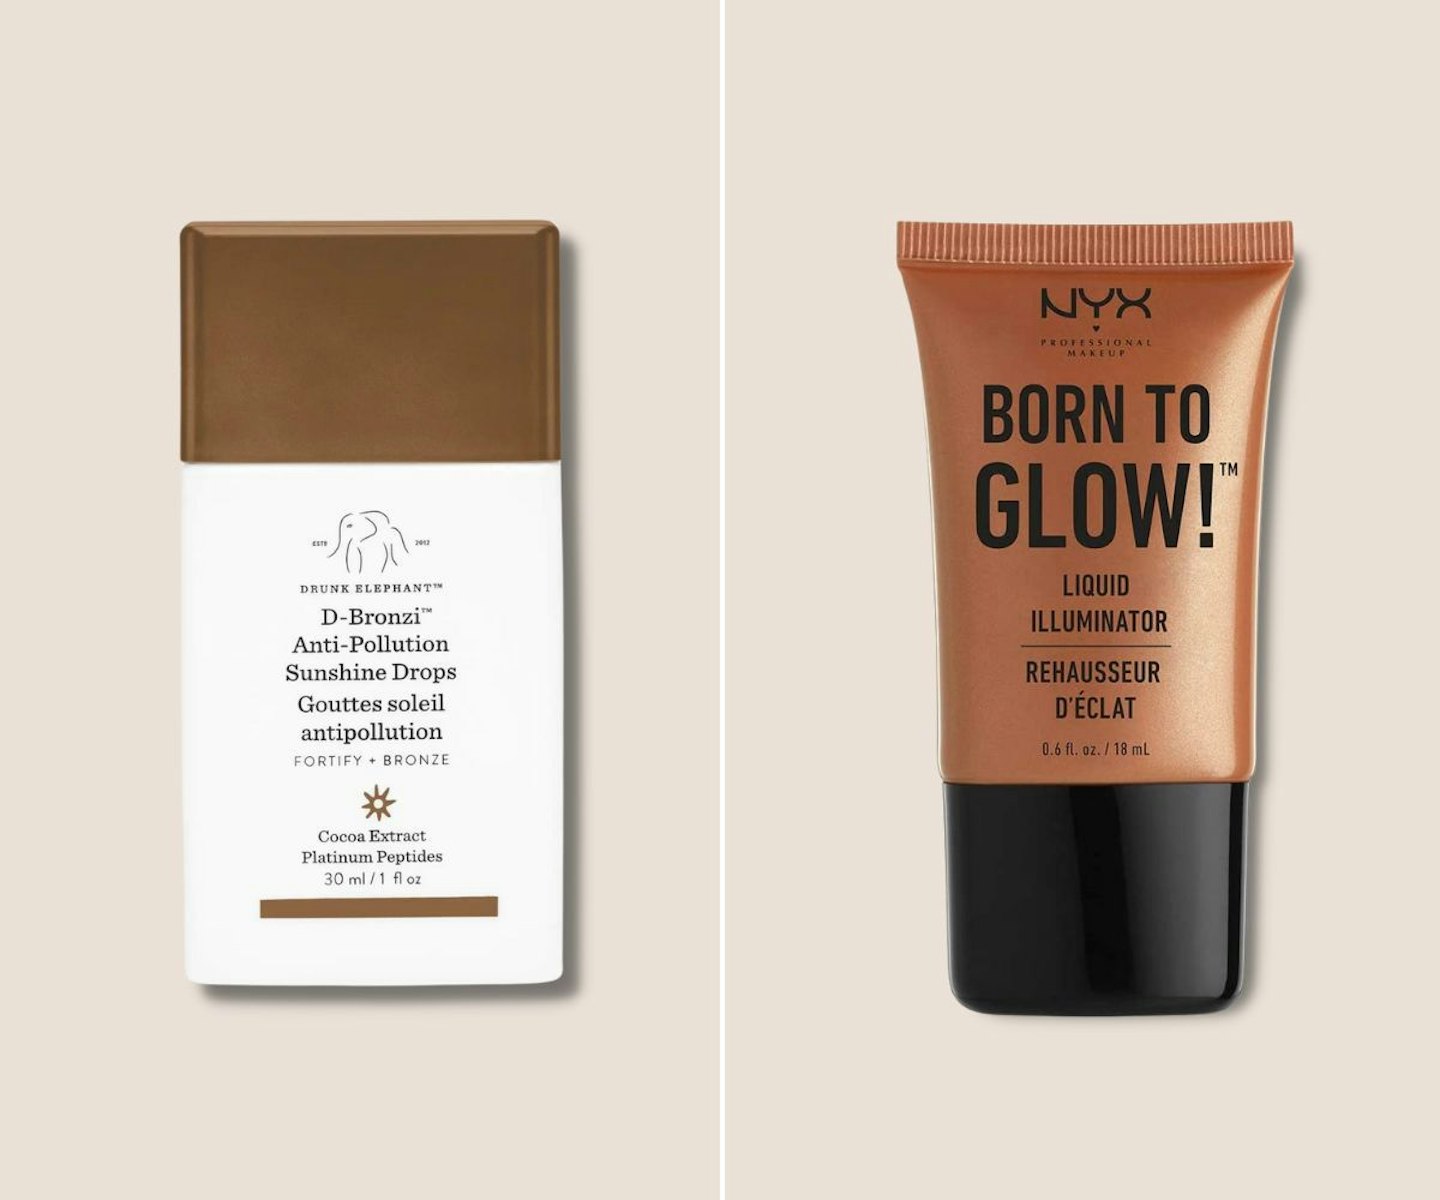 These Beauty Dupes May Be Even Better Than Luxury Items